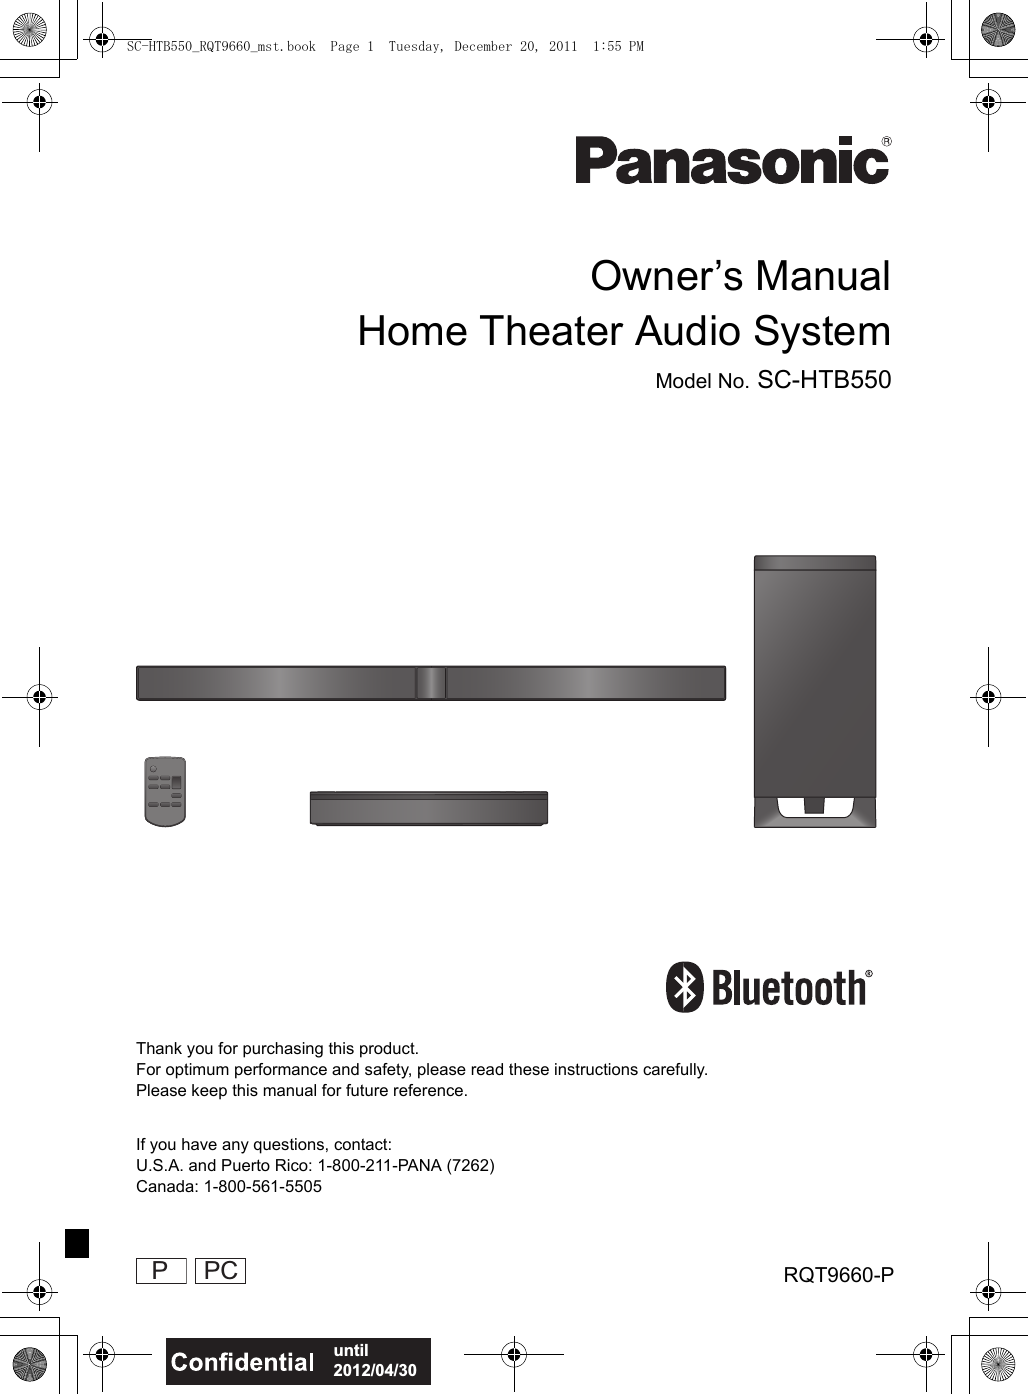 until 2012/04/30Owner’s ManualHome Theater Audio SystemModel No. SC-HTB550 PThank you for purchasing this product.For optimum performance and safety, please read these instructions carefully.Please keep this manual for future reference.If you have any questions, contact:U.S.A. and Puerto Rico: 1-800-211-PANA (7262)Canada: 1-800-561-5505RQT9660-PPCSC-HTB550_RQT9660_mst.book  Page 1  Tuesday, December 20, 2011  1:55 PM